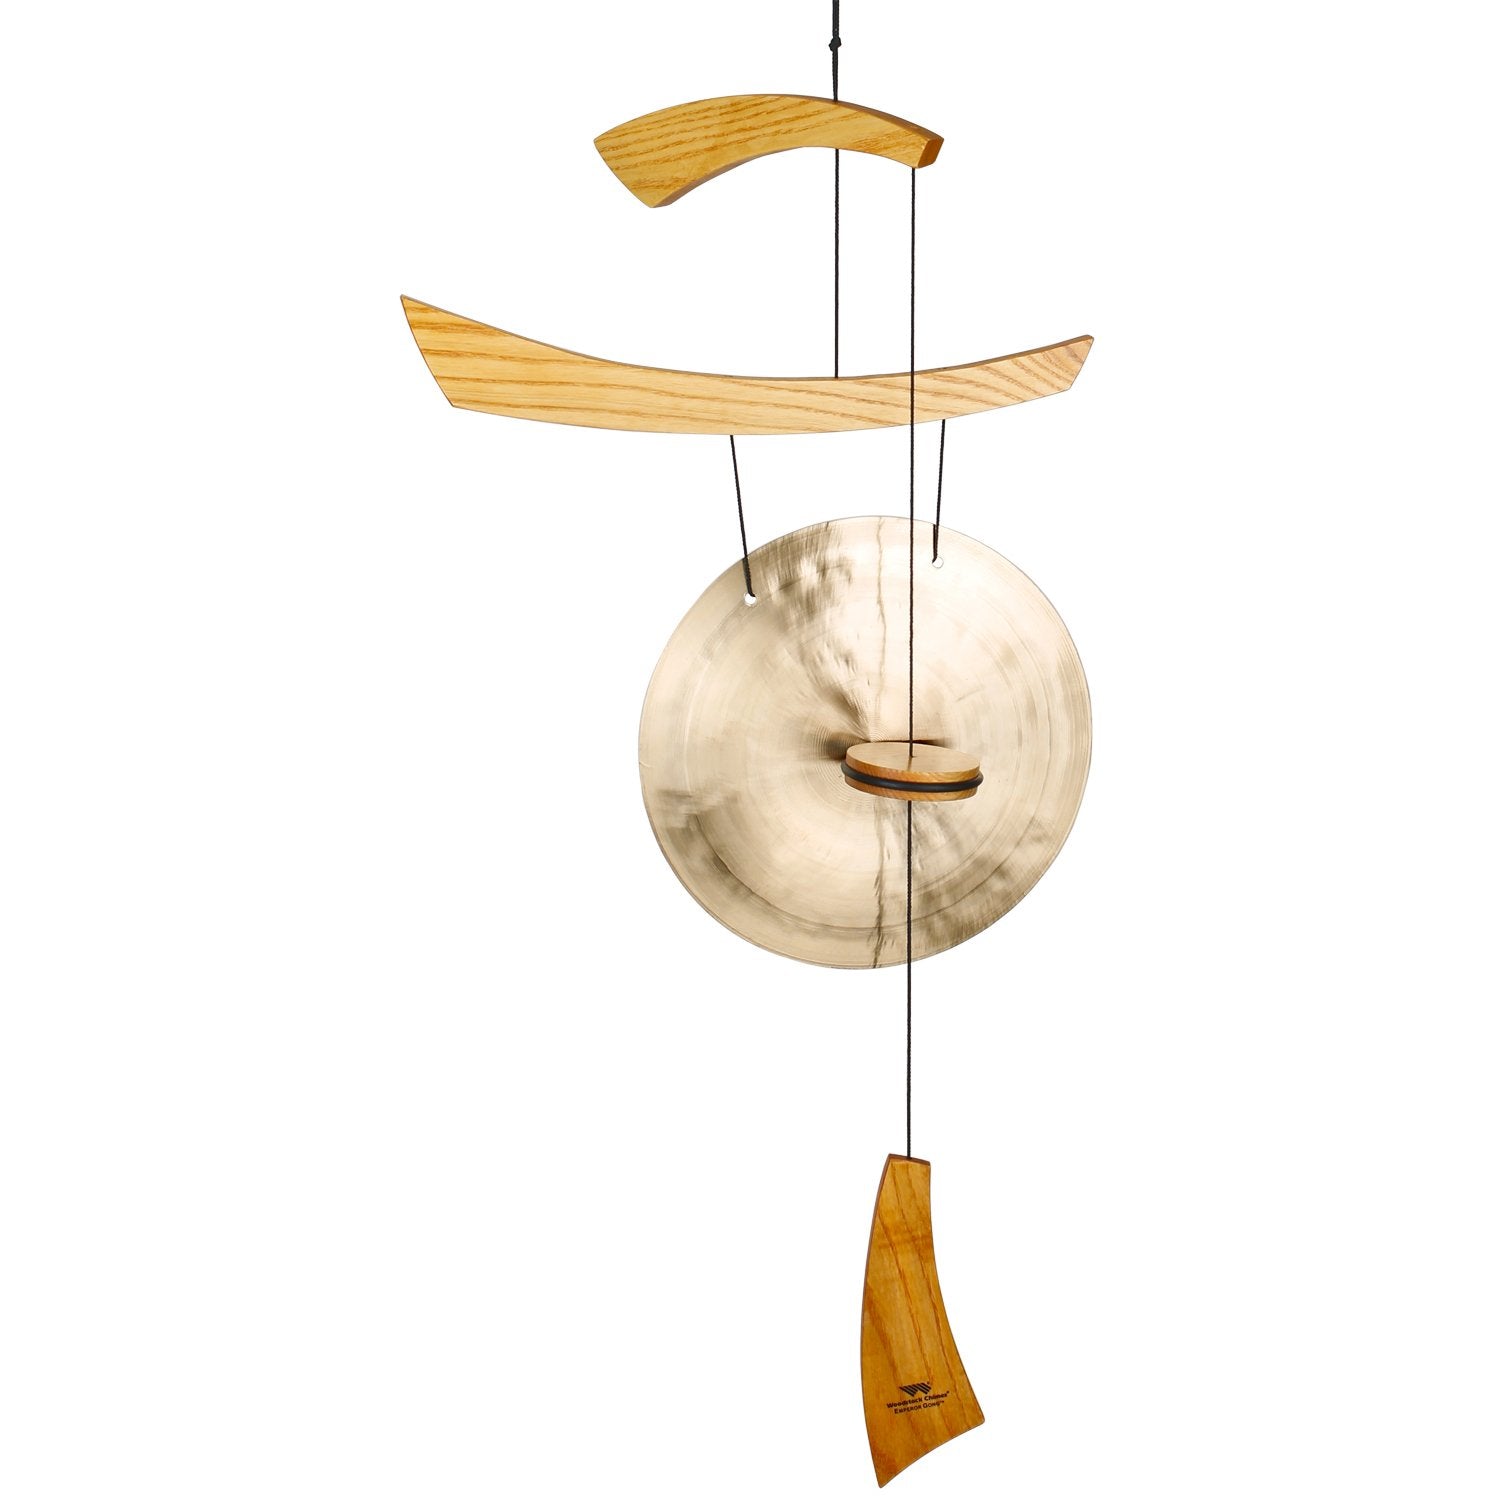 Gong de Table - Chinois - Woodstock Chimes - Desk Gong 30CM